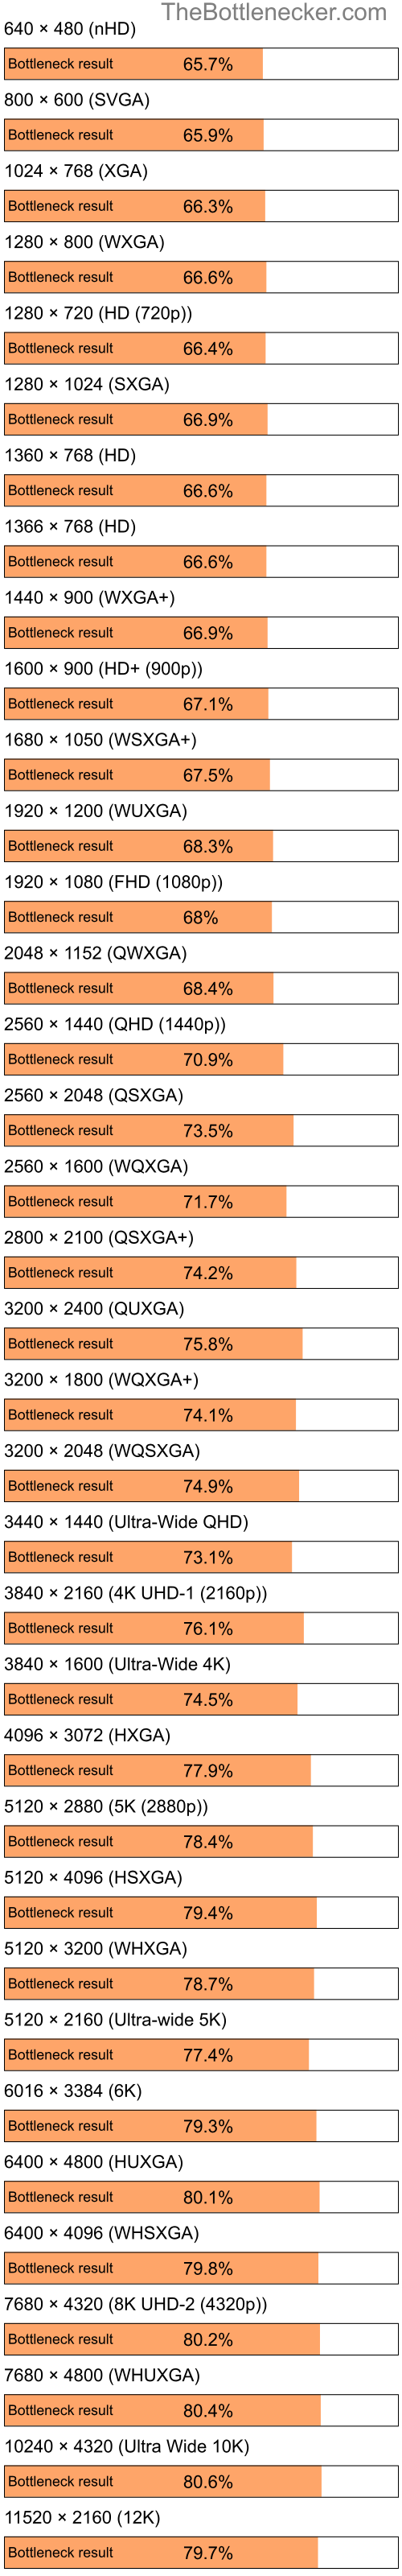 Bottleneck results by resolution for Intel Atom Z520 and NVIDIA nForce 720a in General Tasks